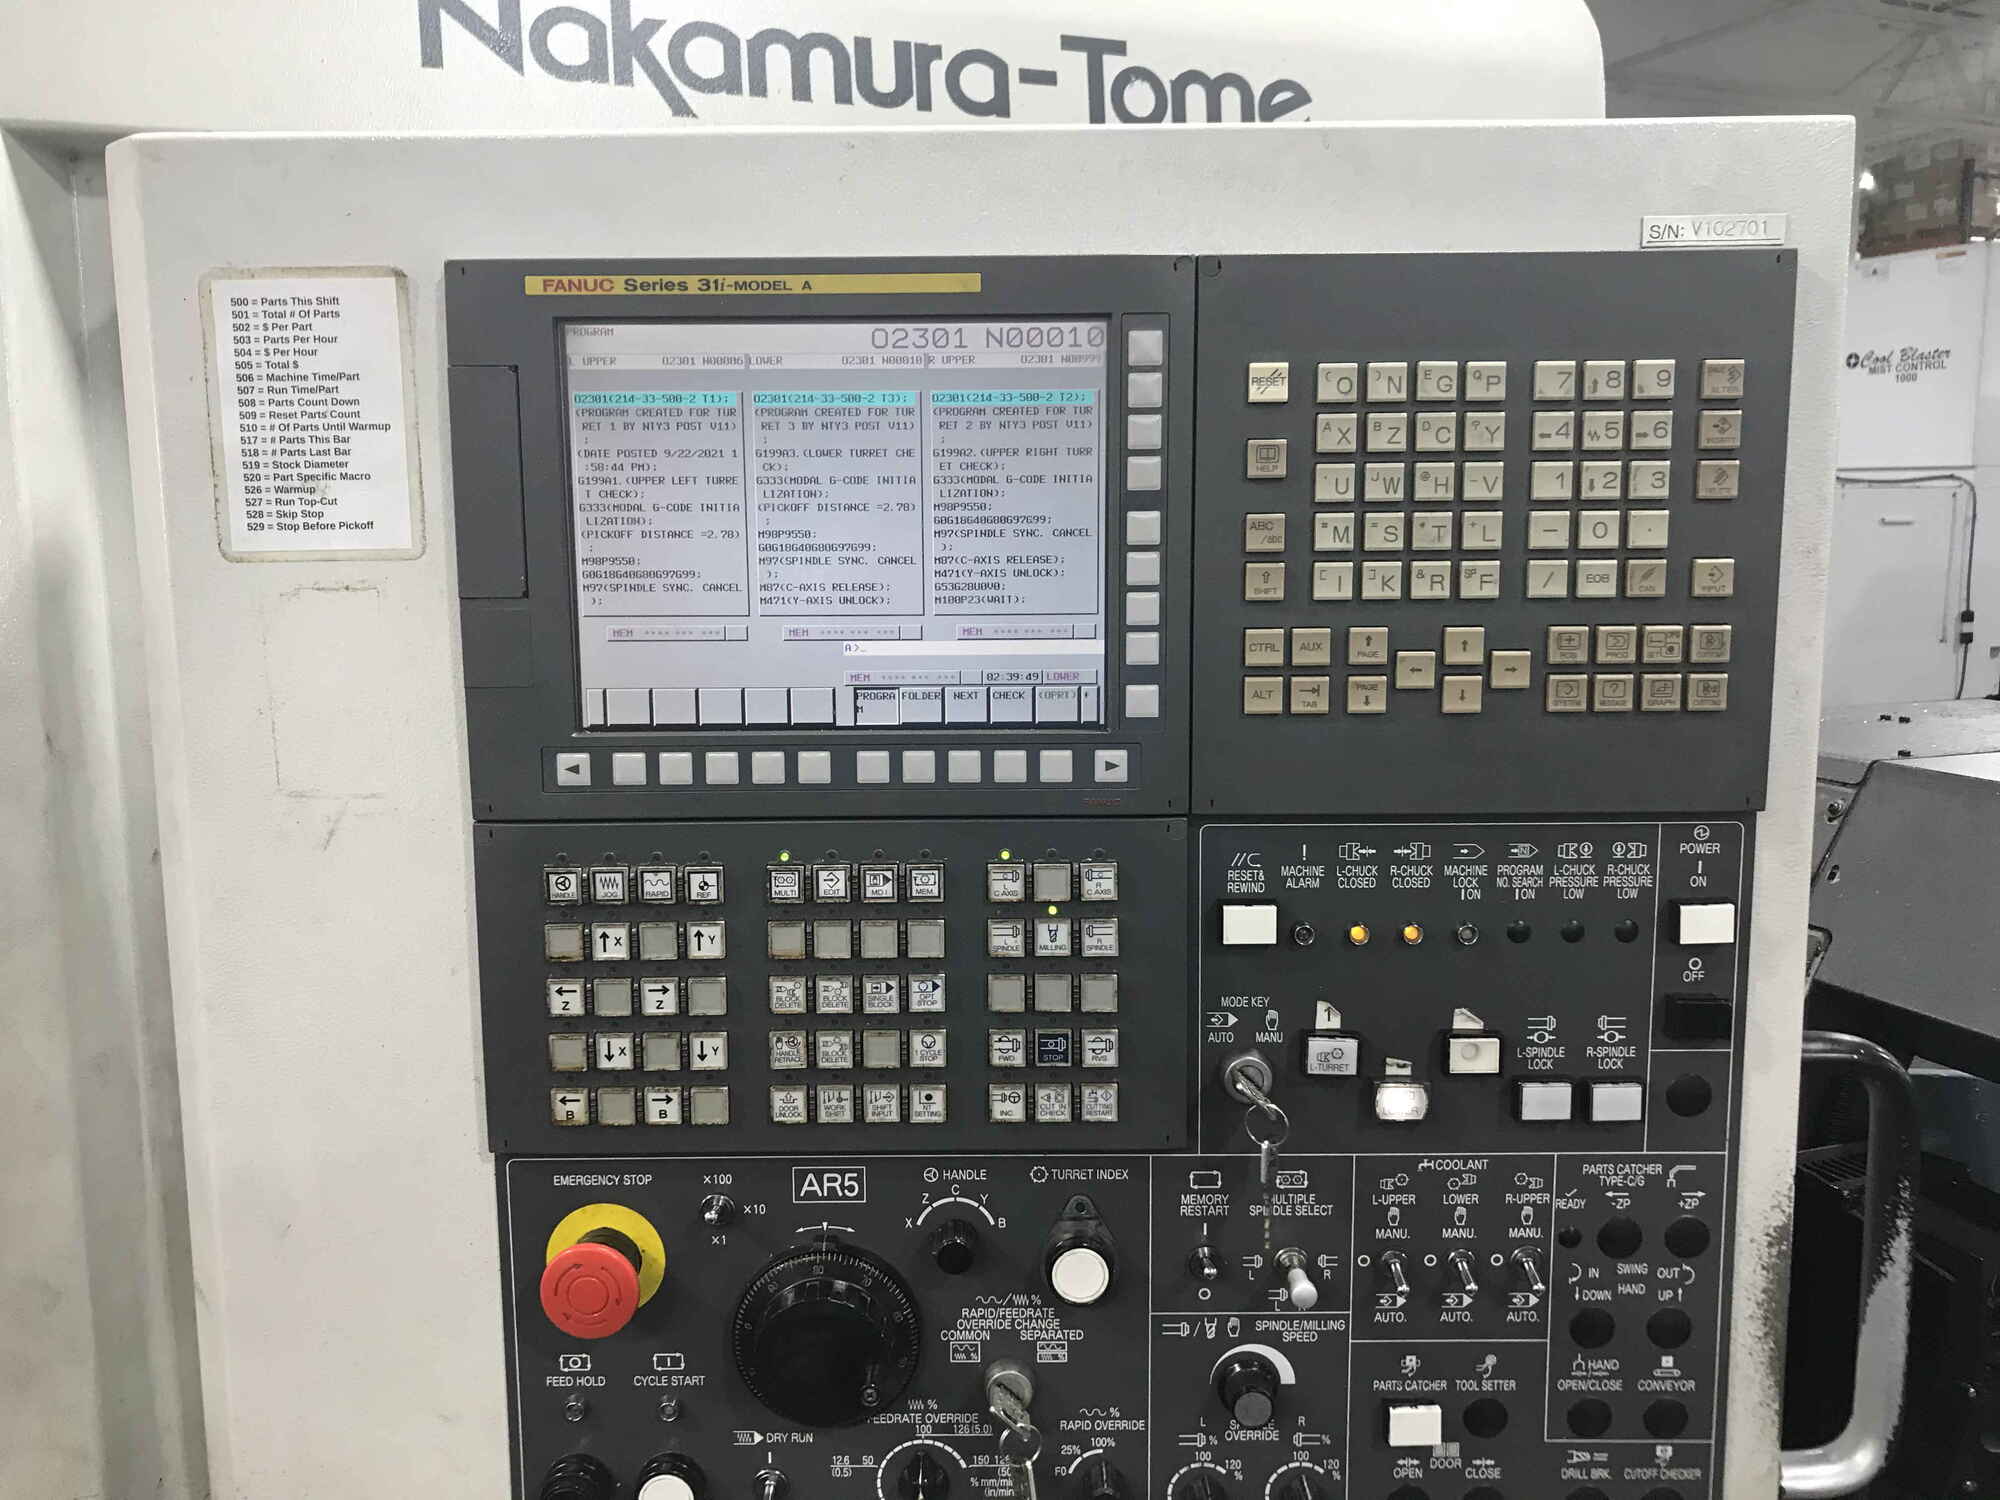 2012 NAKAMURA-TOME NTY3-150 5-Axis or More CNC Lathes | Midstate Machinery